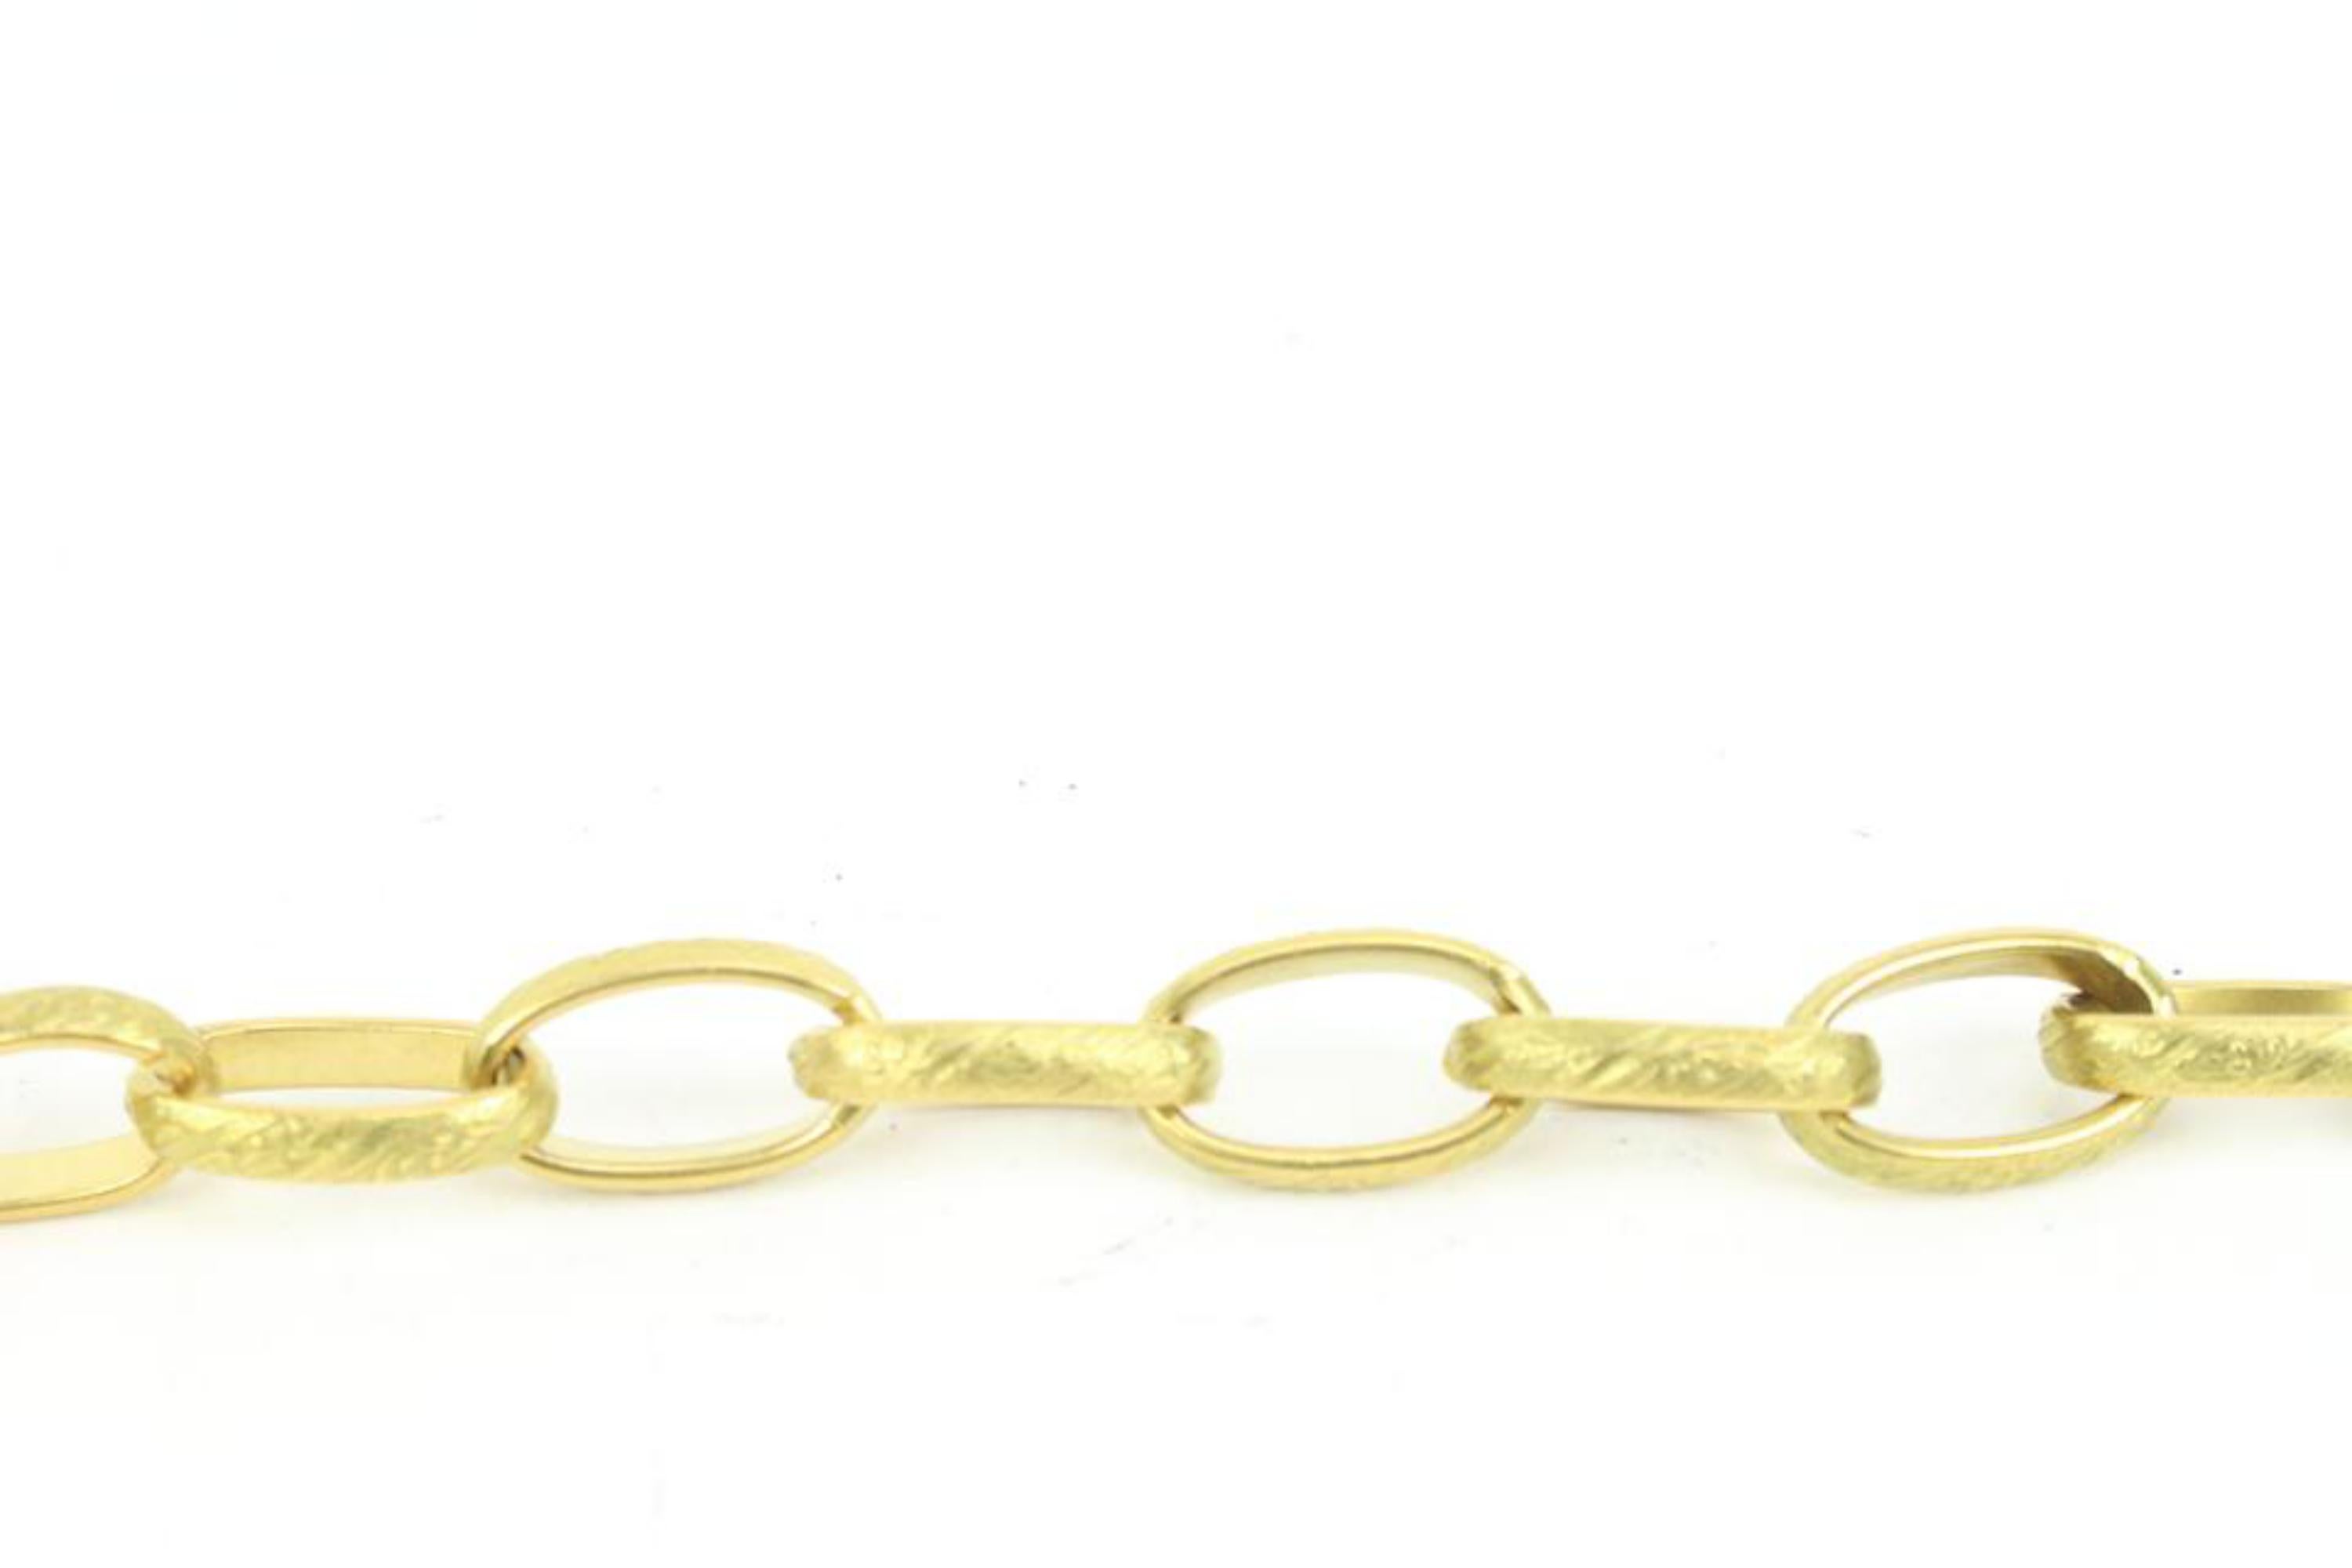 Chanel 95C Clear x Gold CC Chain Belt Necklace 2way 89cz425s For Sale 4